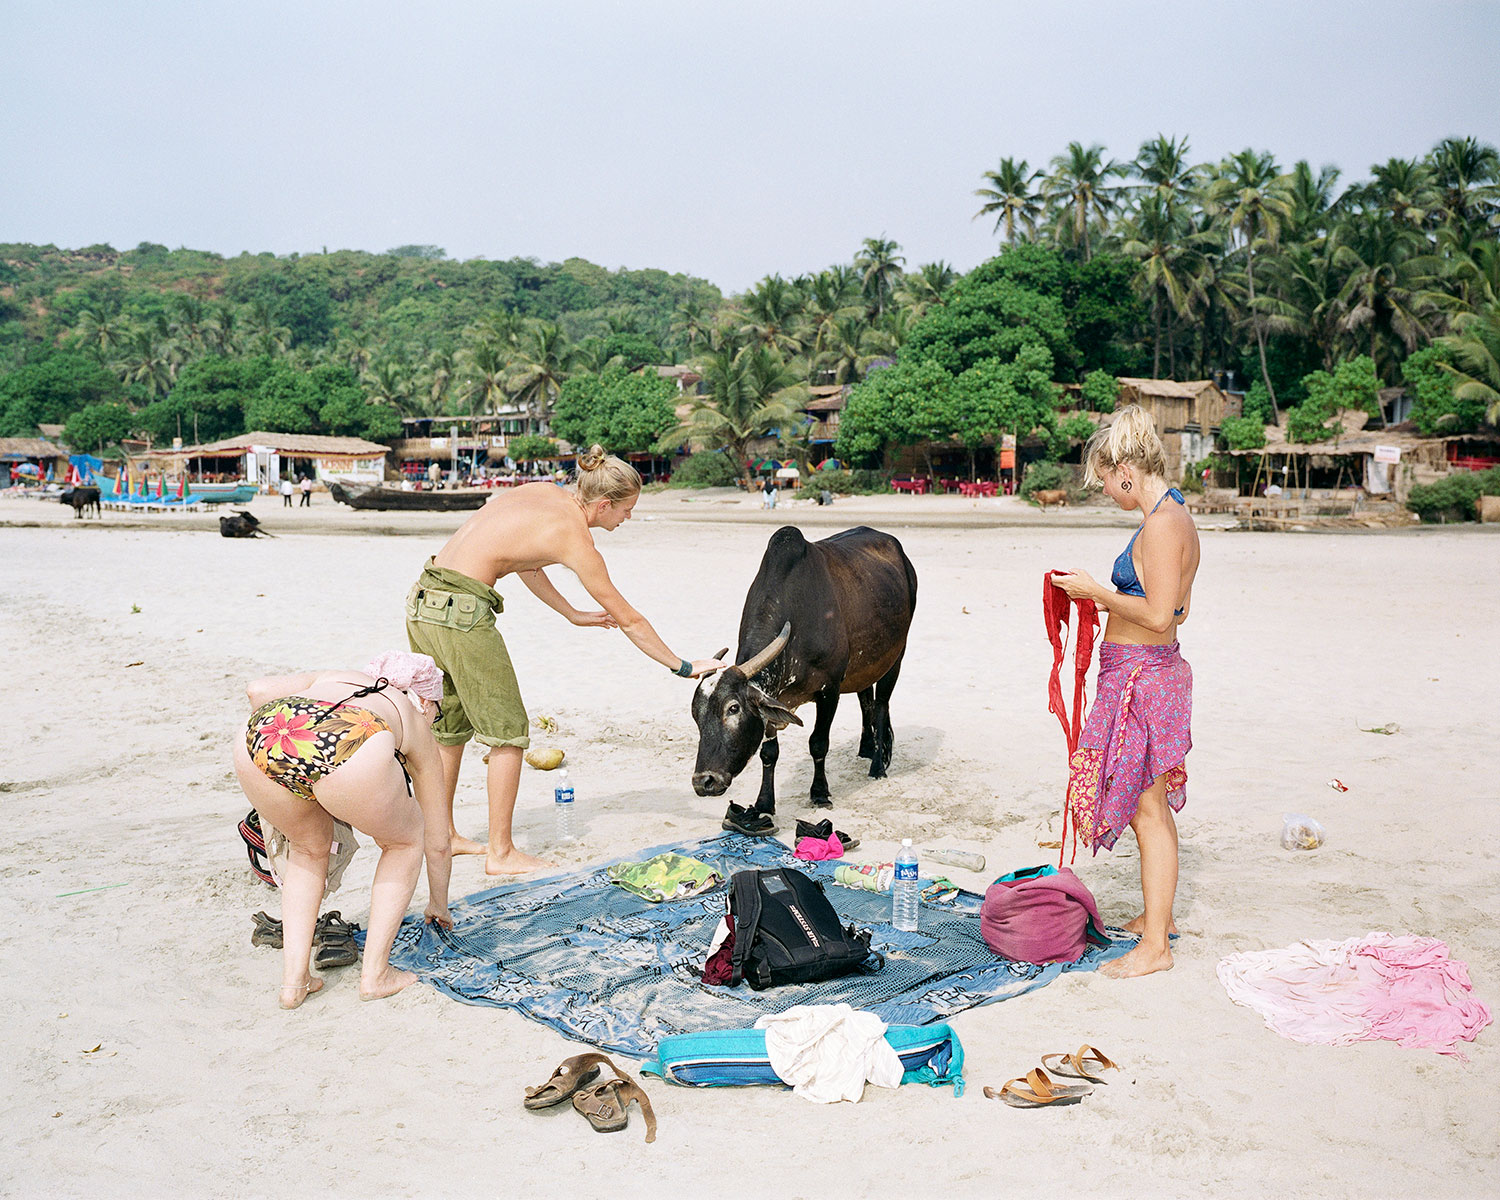 Three backpackers defend their beach towel against a cow. Cows can move with complete freedom in India and in Goa they love the tourists' towels in Arambol, India, January 2007.